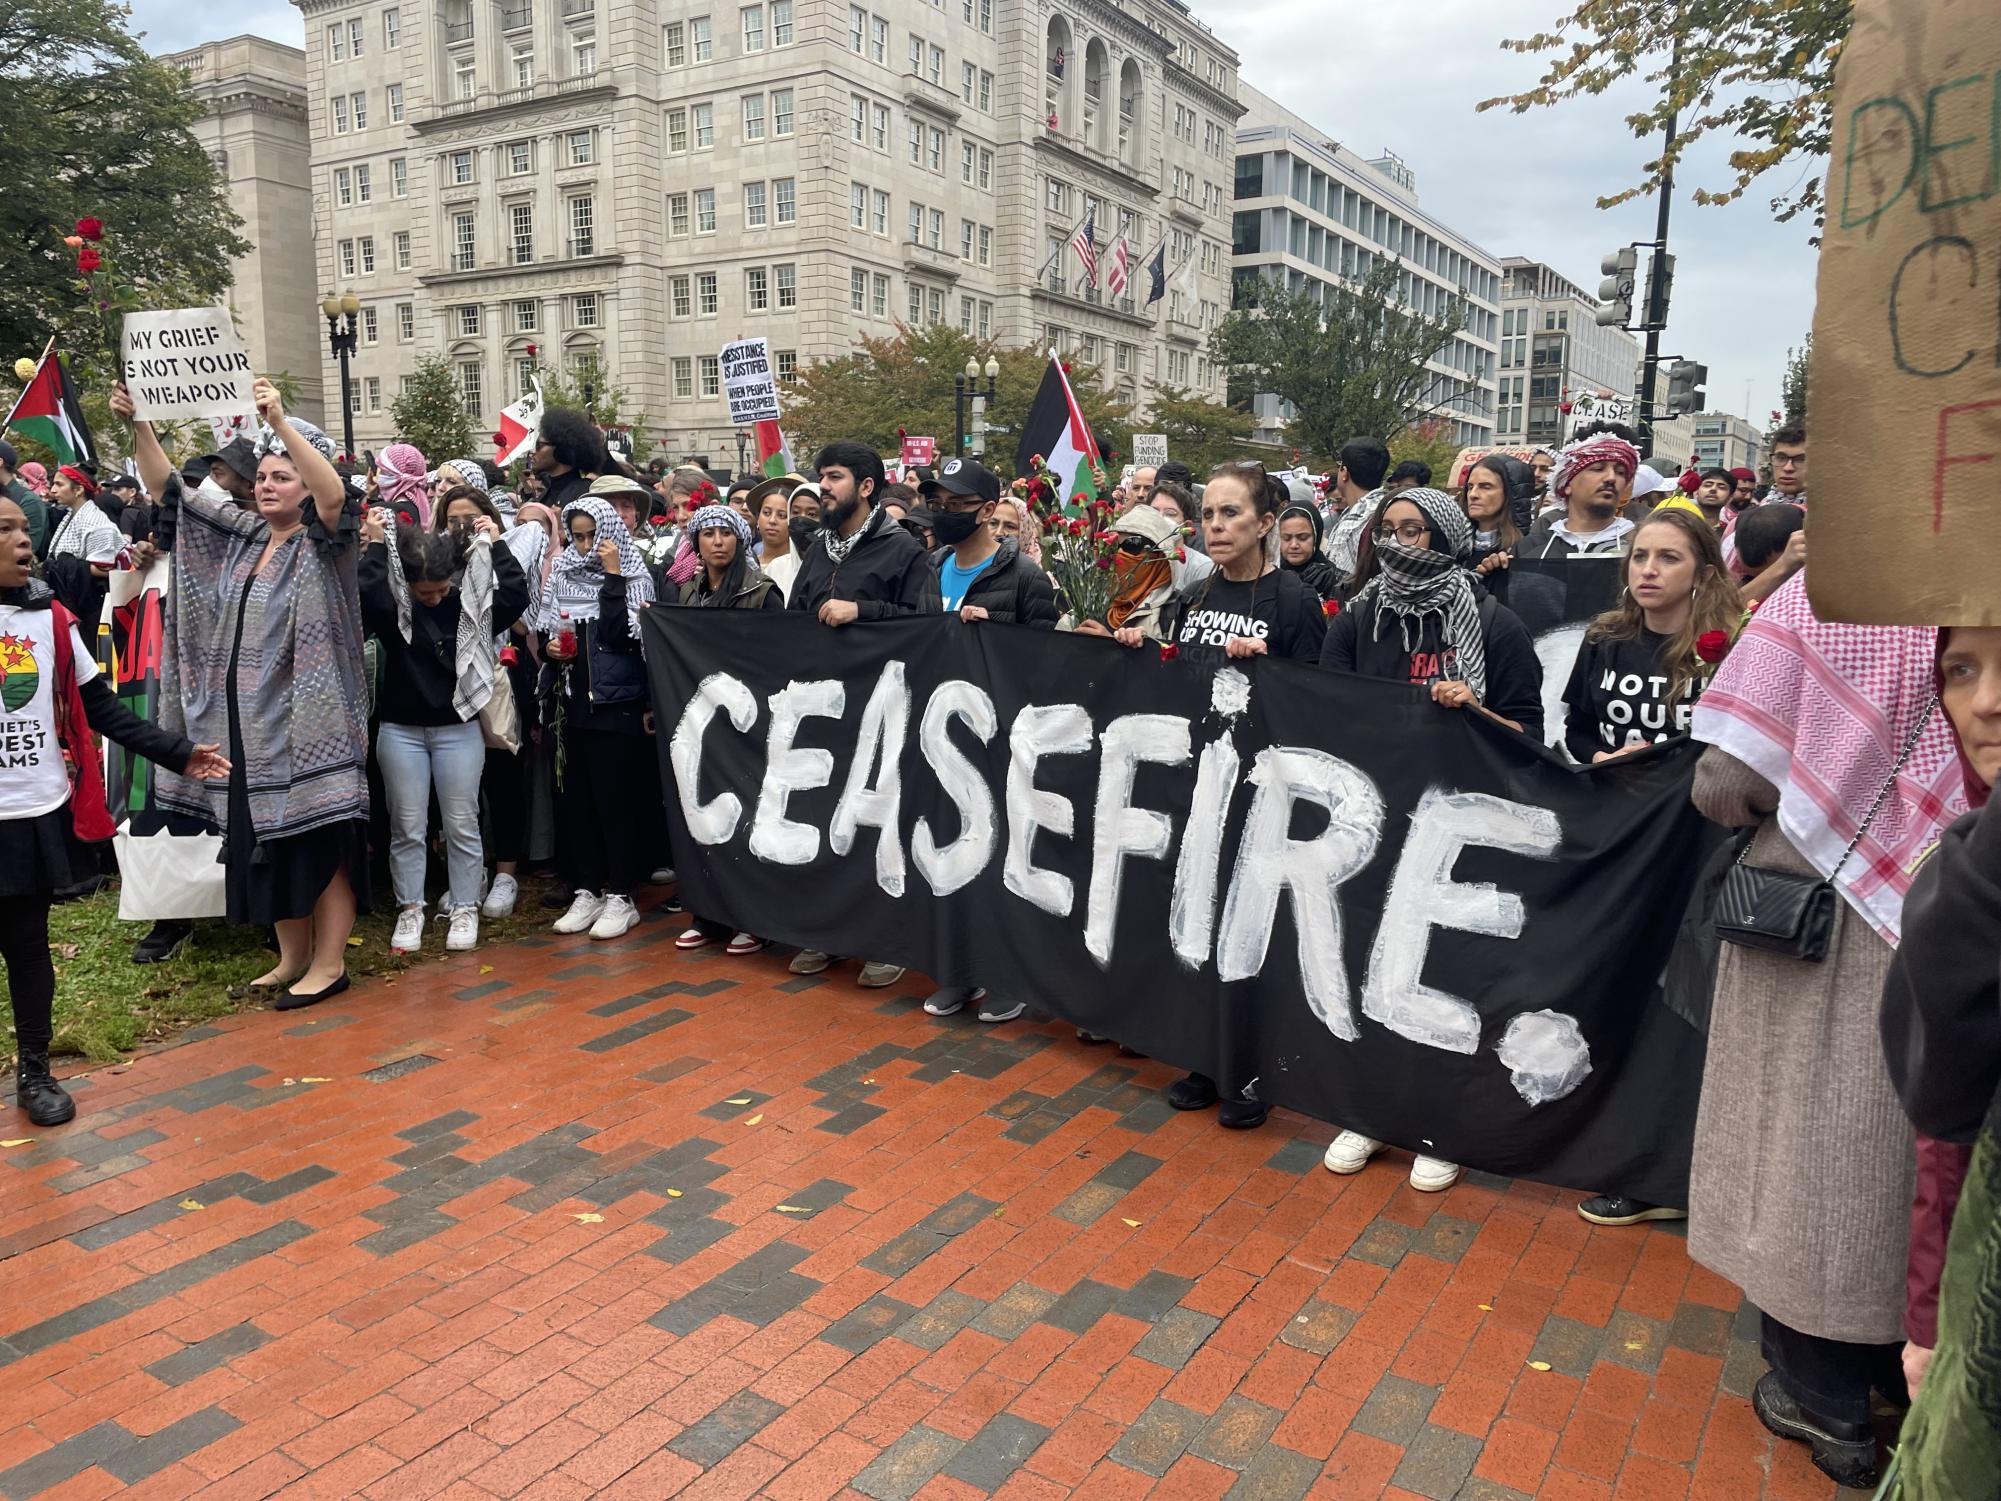 OPPOSITION TO WAR. Protesters march down Pennsylvania Ave in Washington, D.C. on Oct. 20, after President Biden requested $14.3 billion for military aid for Israel. Protesters were mainly seeking a cease-fire, but also vocalized support of Palestinians. 